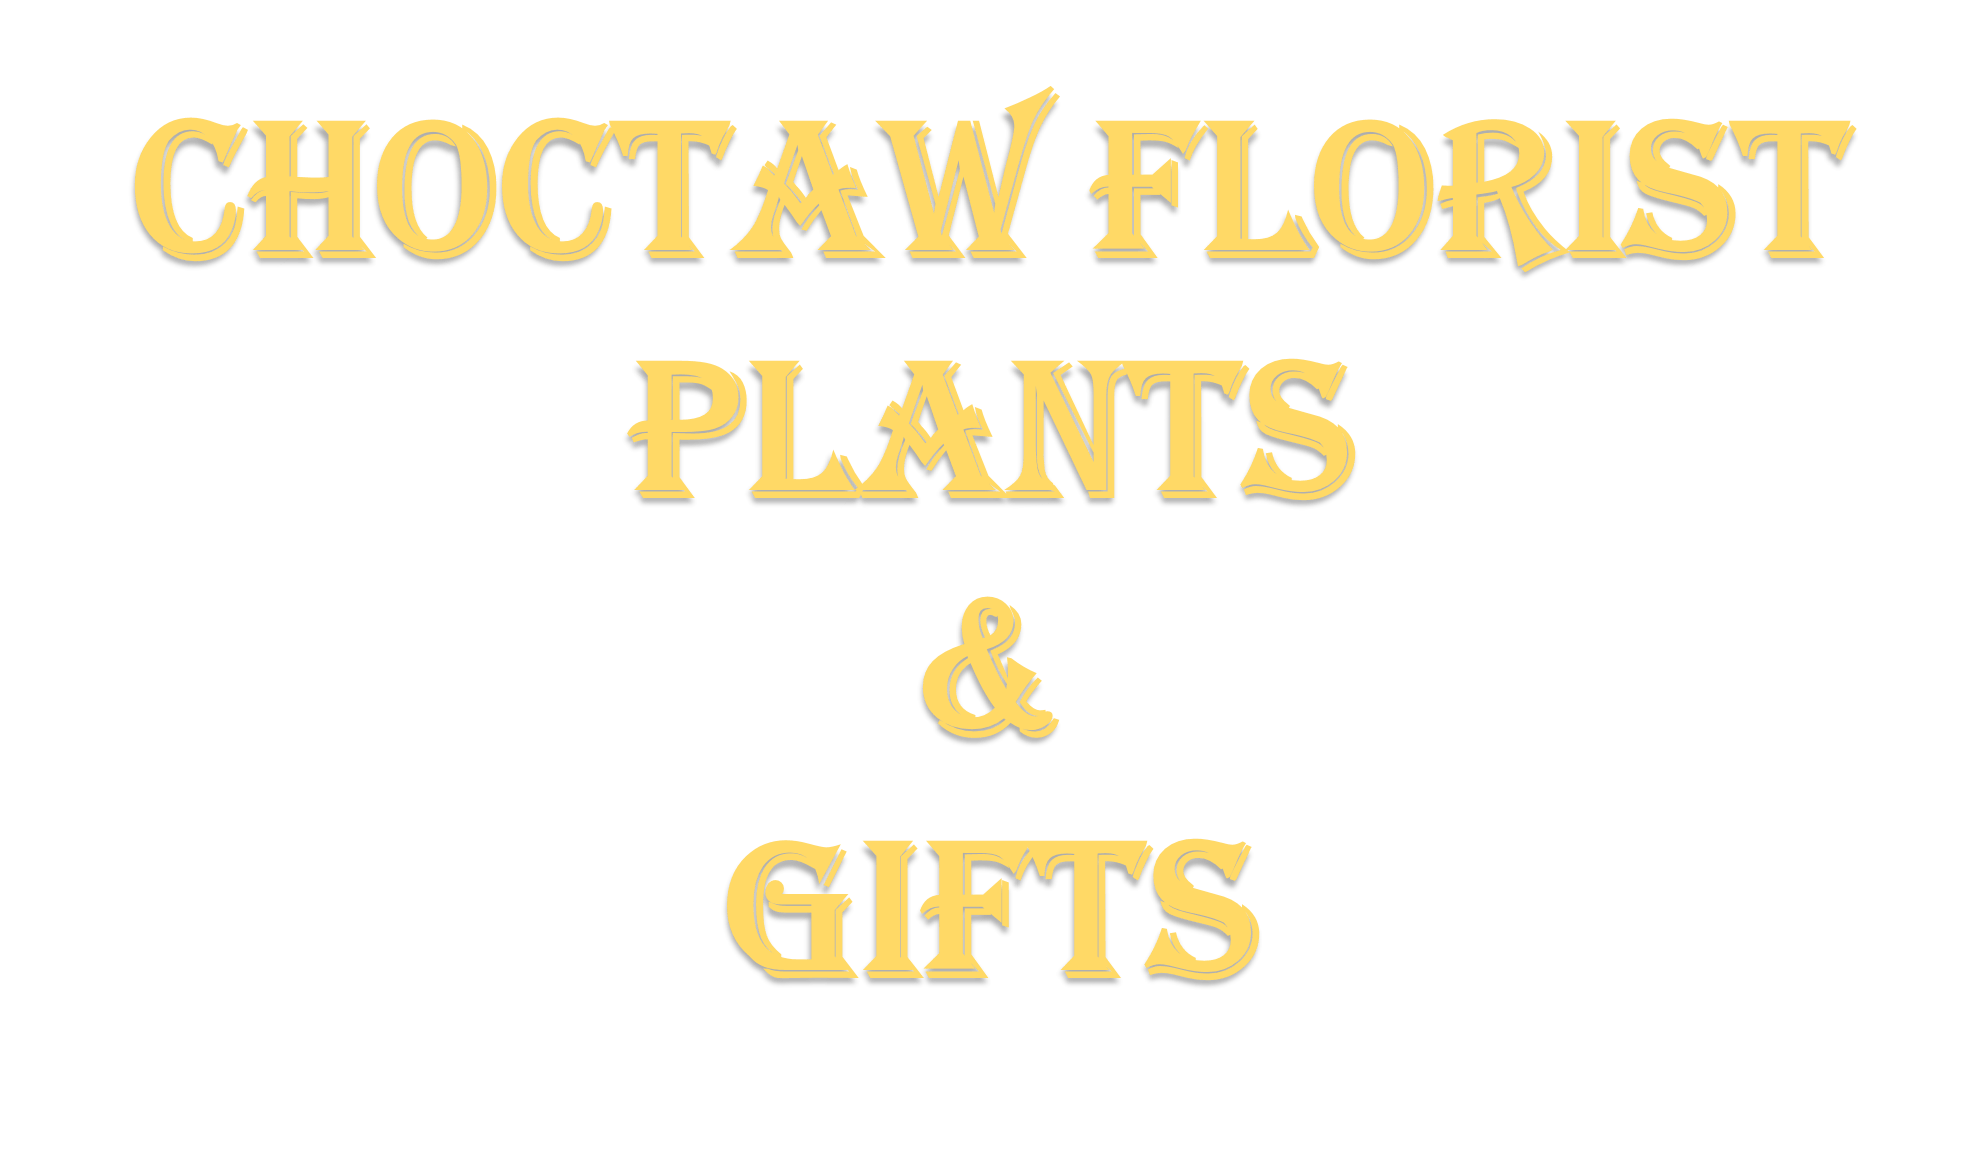 Choctaw Logo - Choctaw Florist - Flower Delivery by Choctaw Florist Plants & Gifts